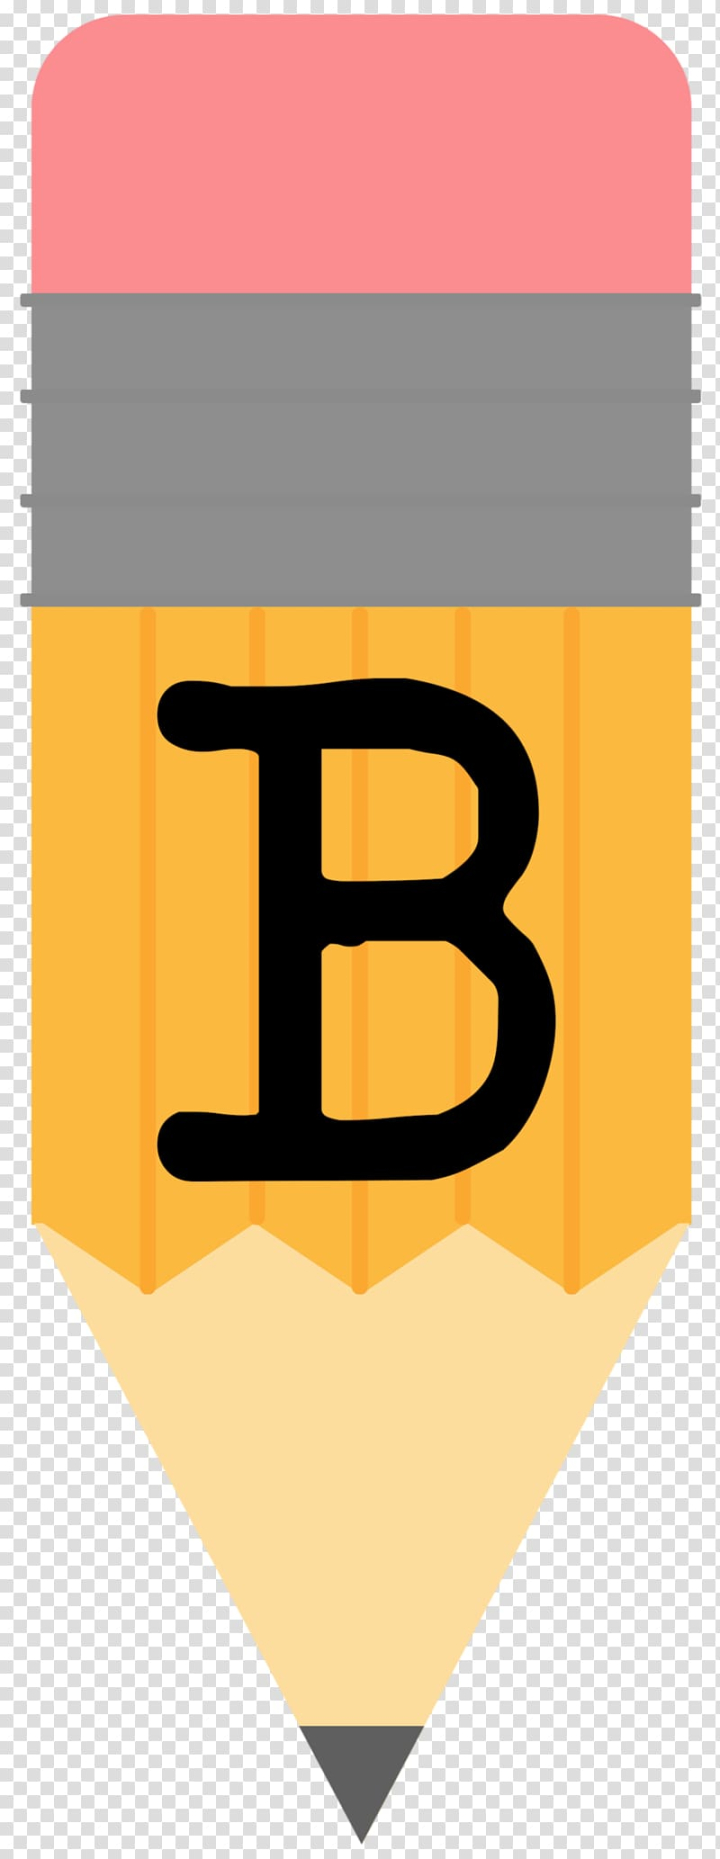 school,library,teacher,paper,banner,back,template,angle,text,class,rectangle,orange,logo,sign,preschool,welcome,back to school,brand,classroom,symbol,education  science,school library,letter,printing,line,yellow,png clipart,free png,transparent background,free clipart,clip art,free download,png,comhiclipart